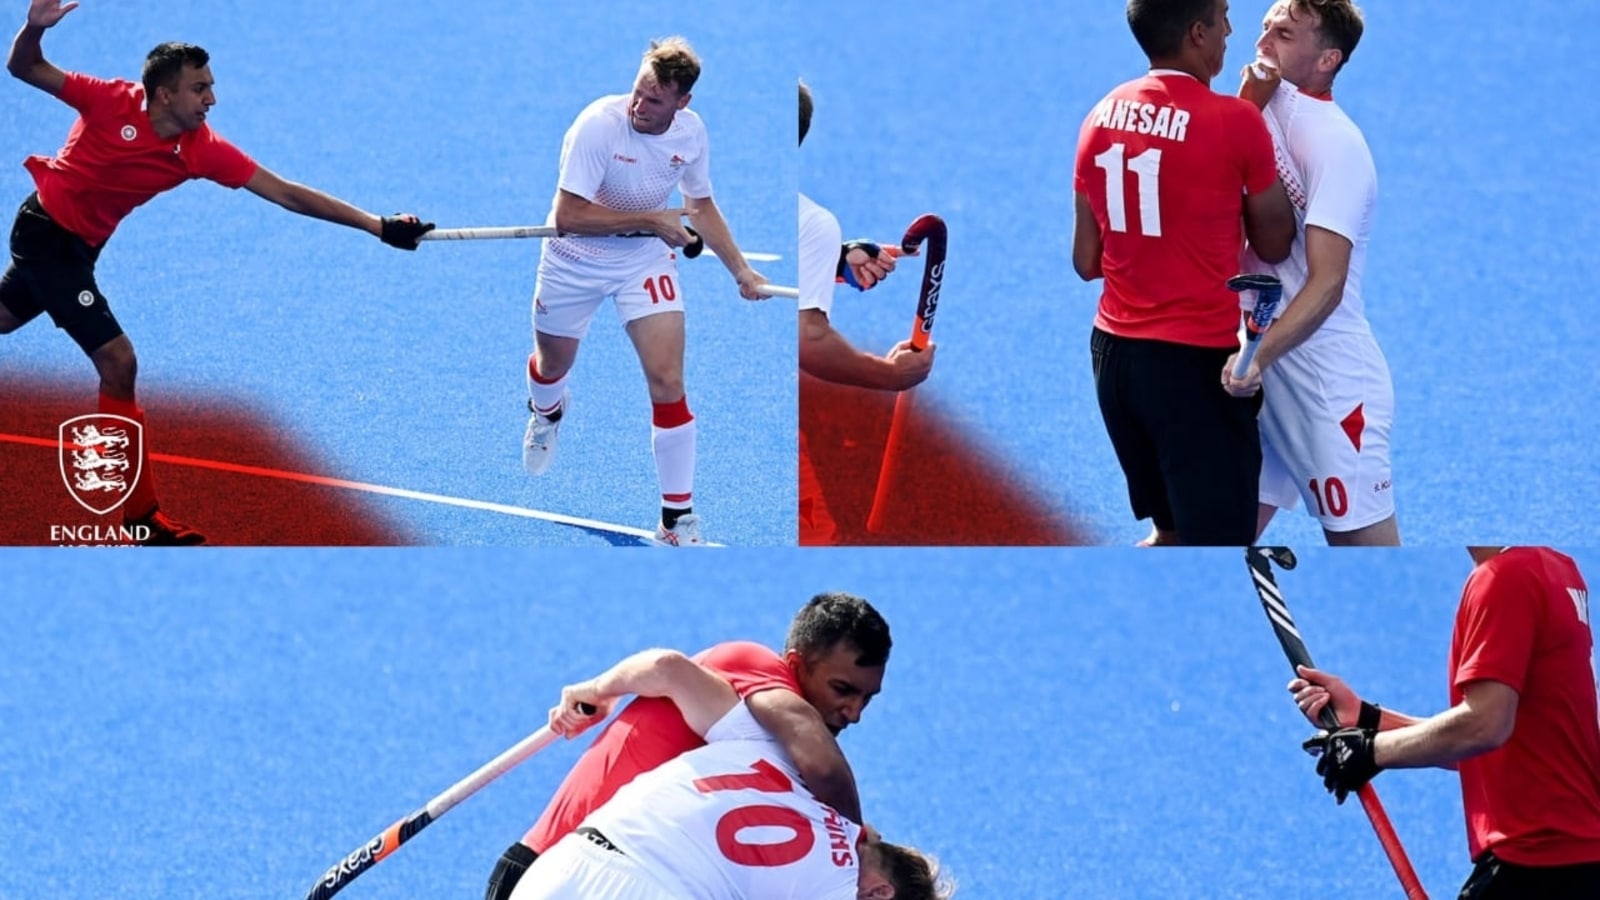 Watch Players engage in ugly brawl as hosts England thrash Canada 11-2 at CWG